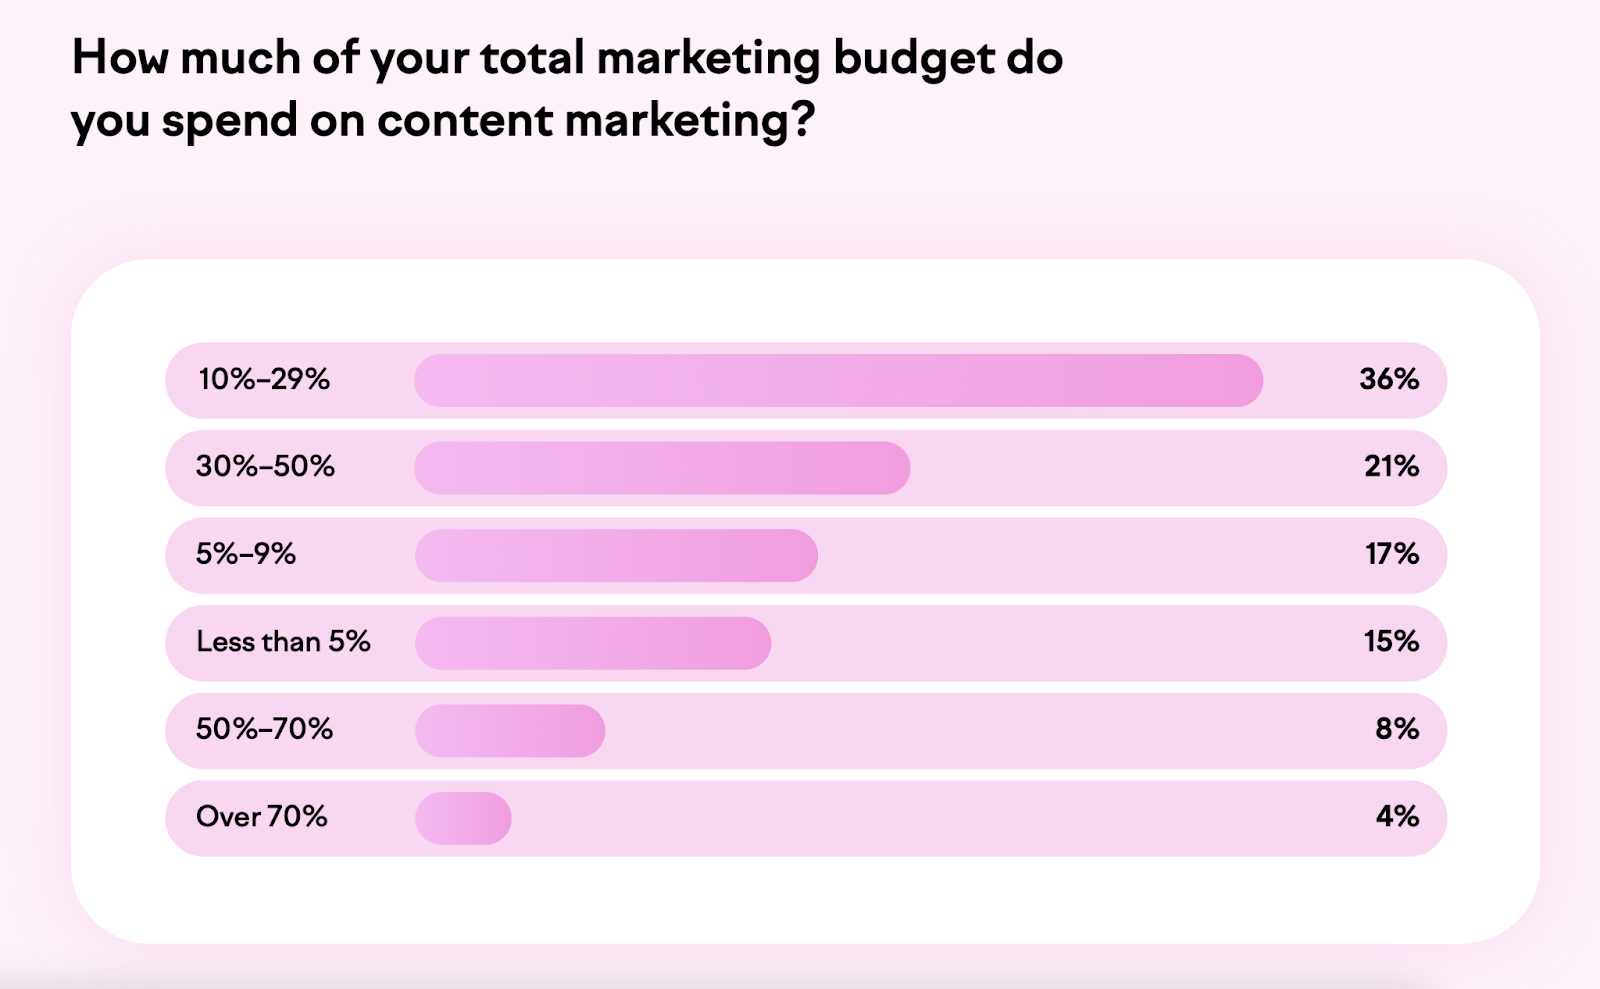 Data from State of Content Marketing report, showing how much of a total budget gets spent on content marketing